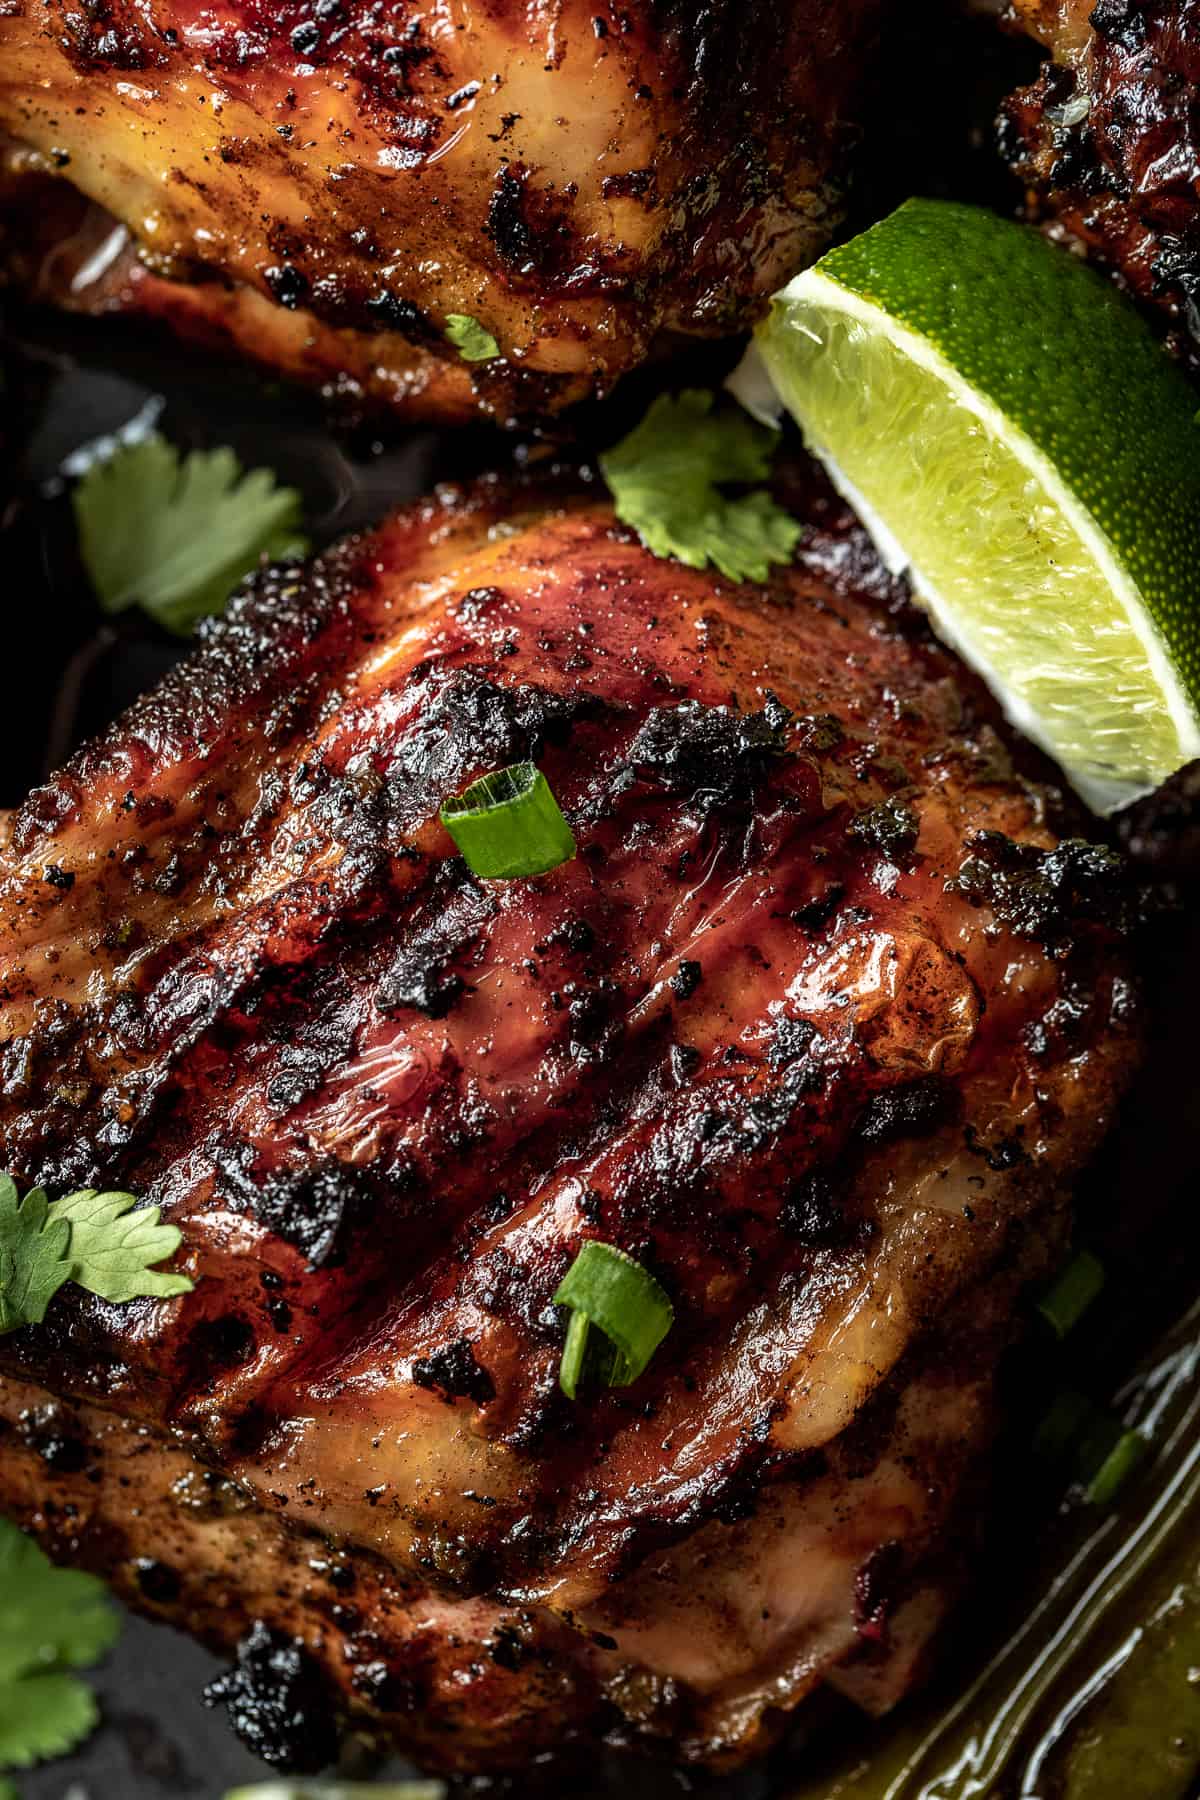 A close up image of a grilled jerk chicken thigh topped with cilantro and lime wedges.